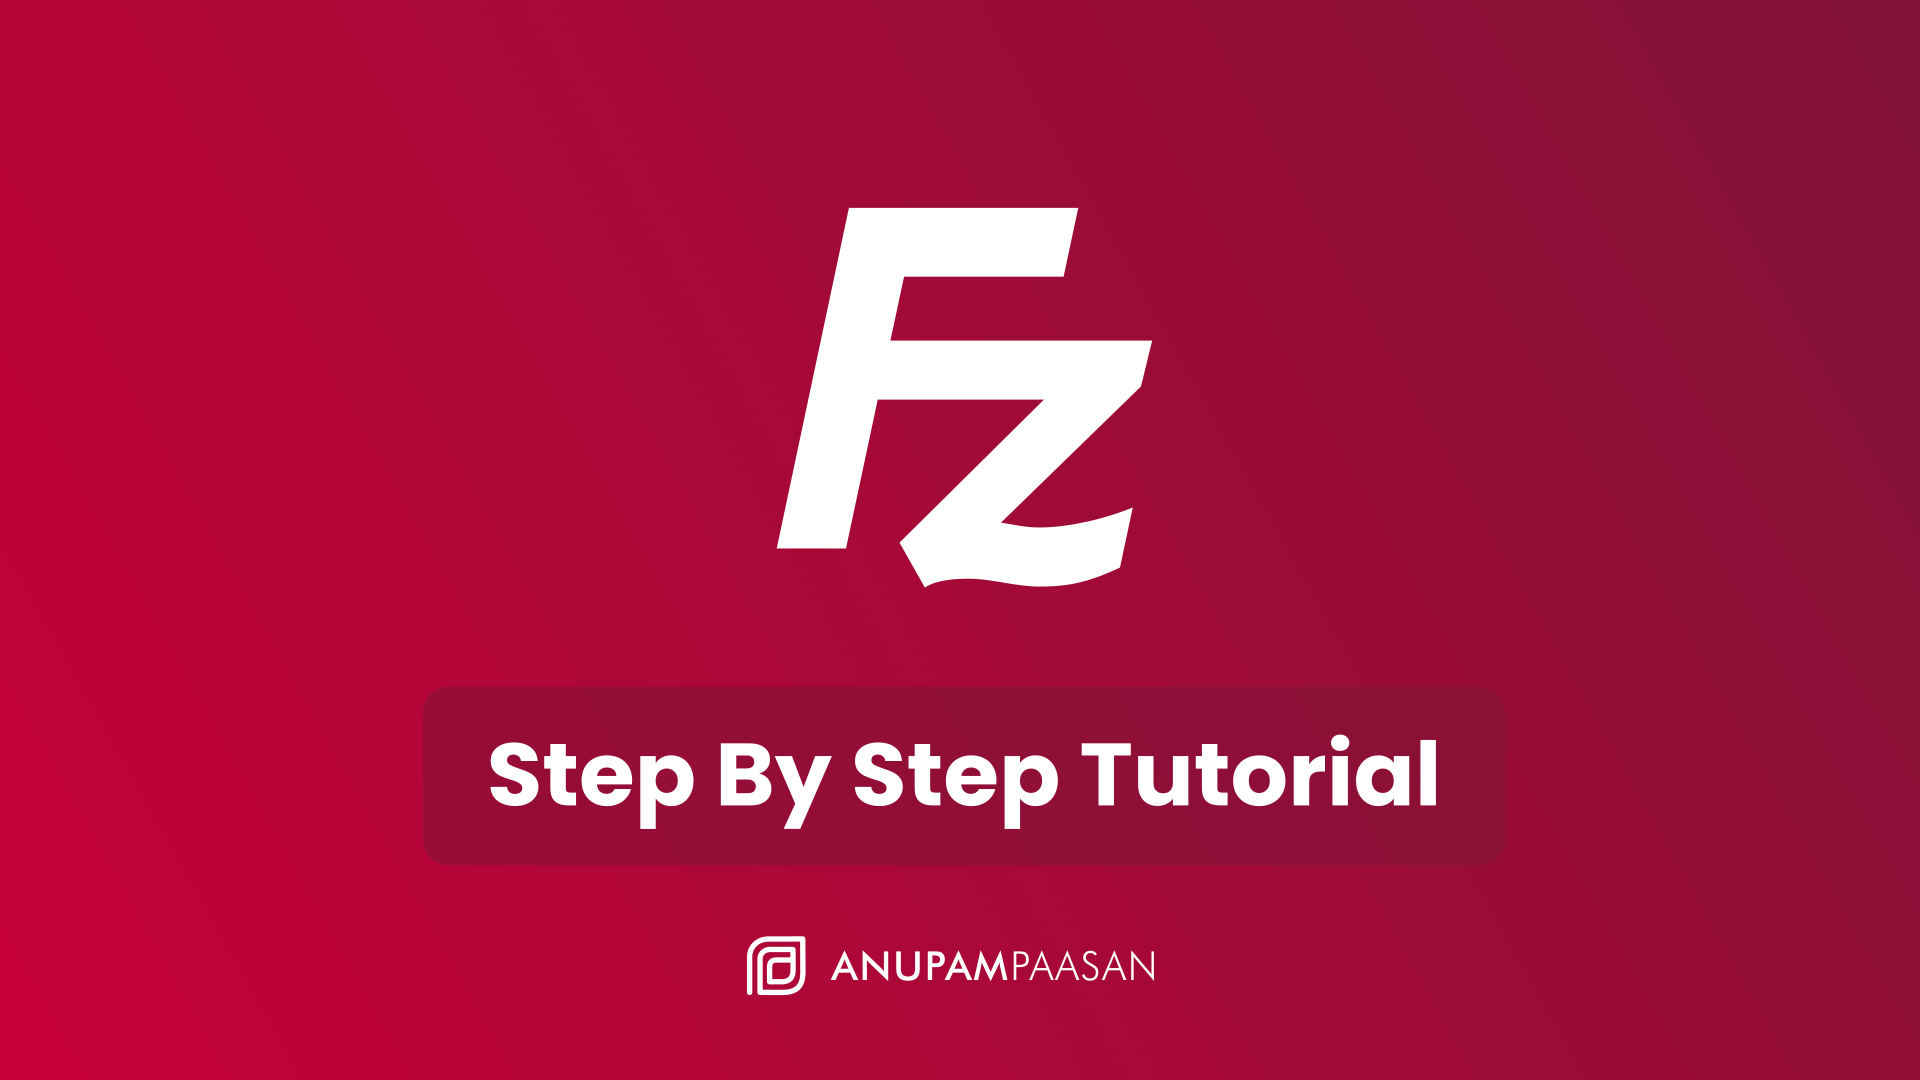 How To Use FileZilla Step By Step Tutorial - Featured Image - Anupam Paasan Digital